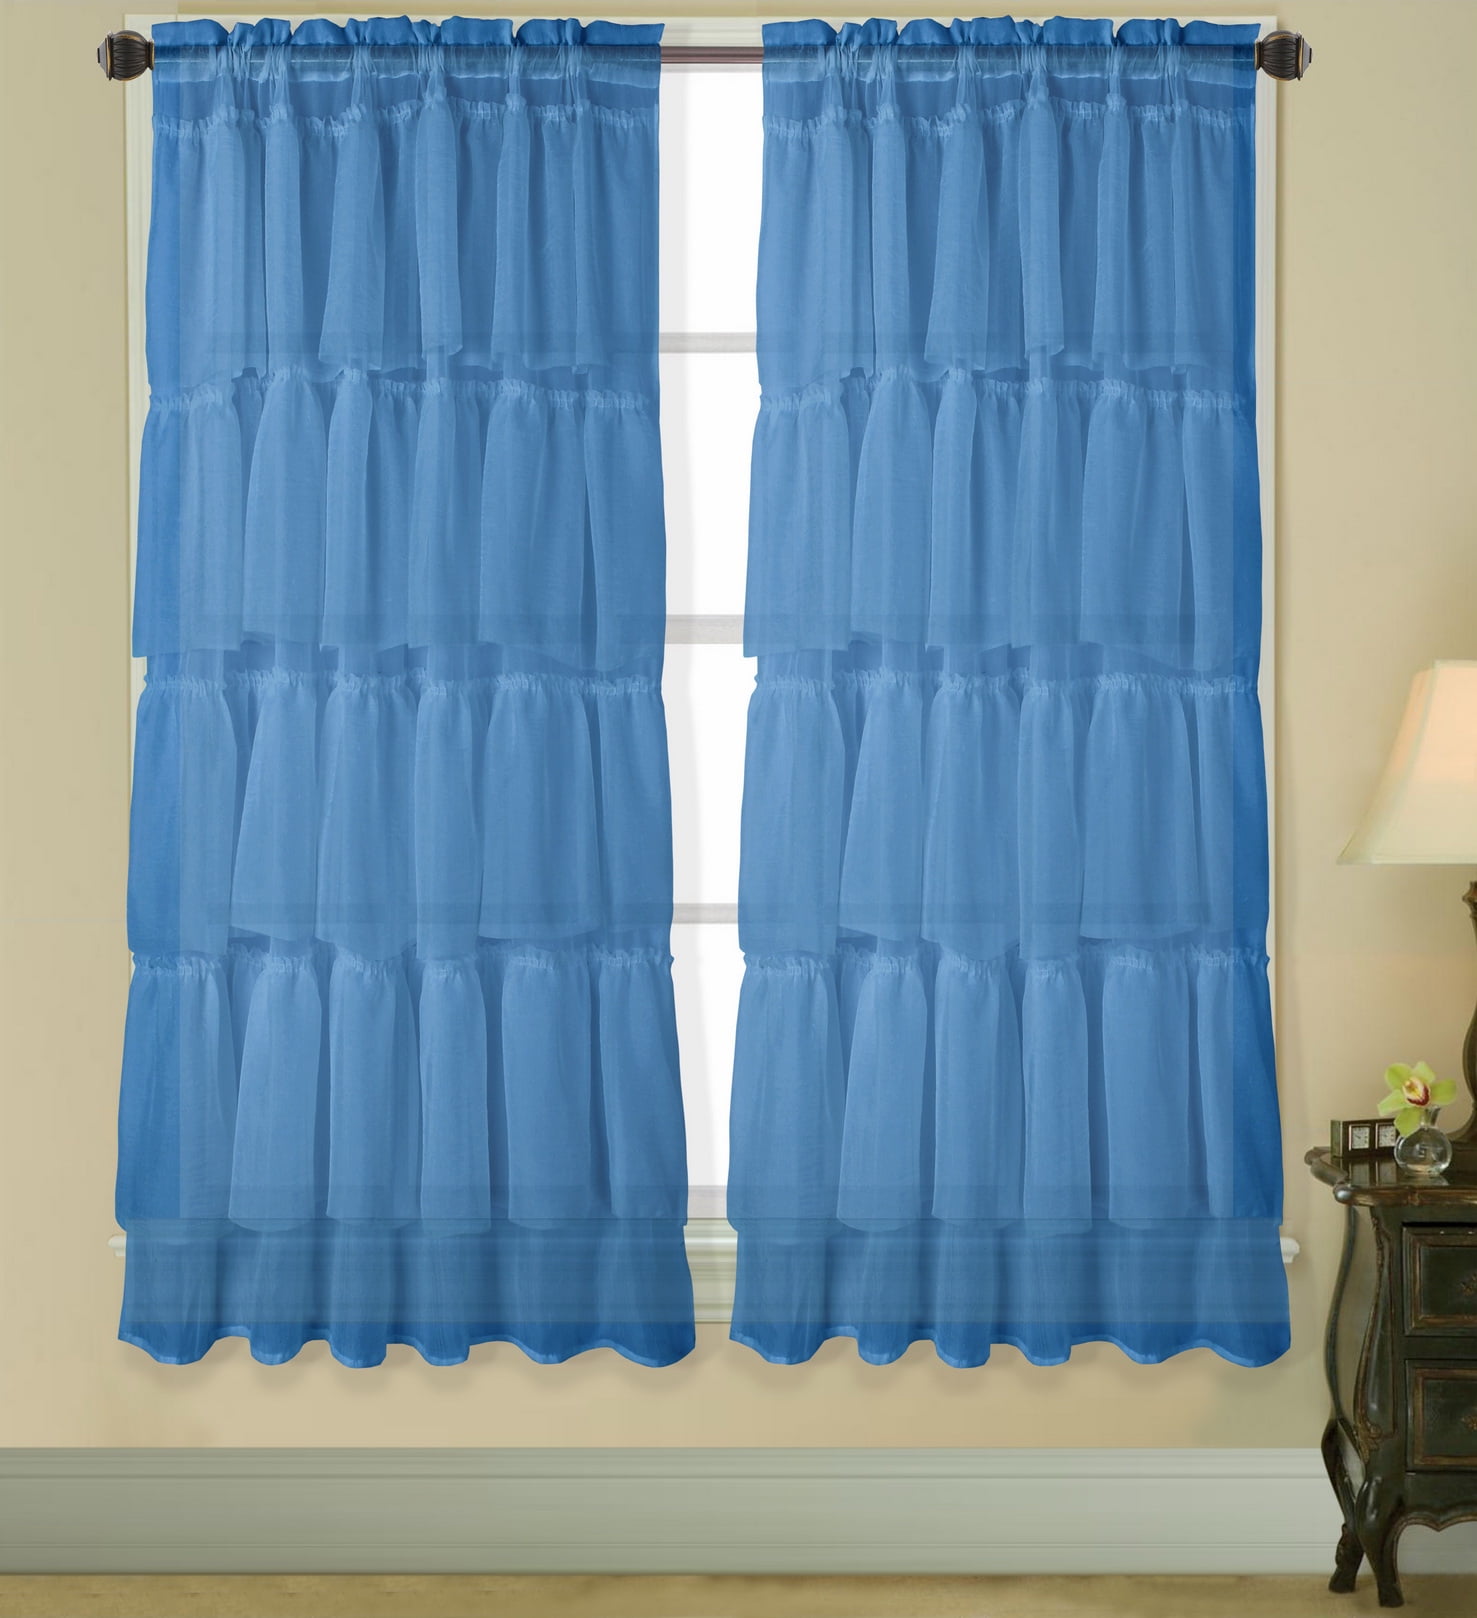 1PC SHORT VOILE SHEER CRUSHED RUFFLE WINDOW DRESSING CURTAIN PANEL TREATMENT 